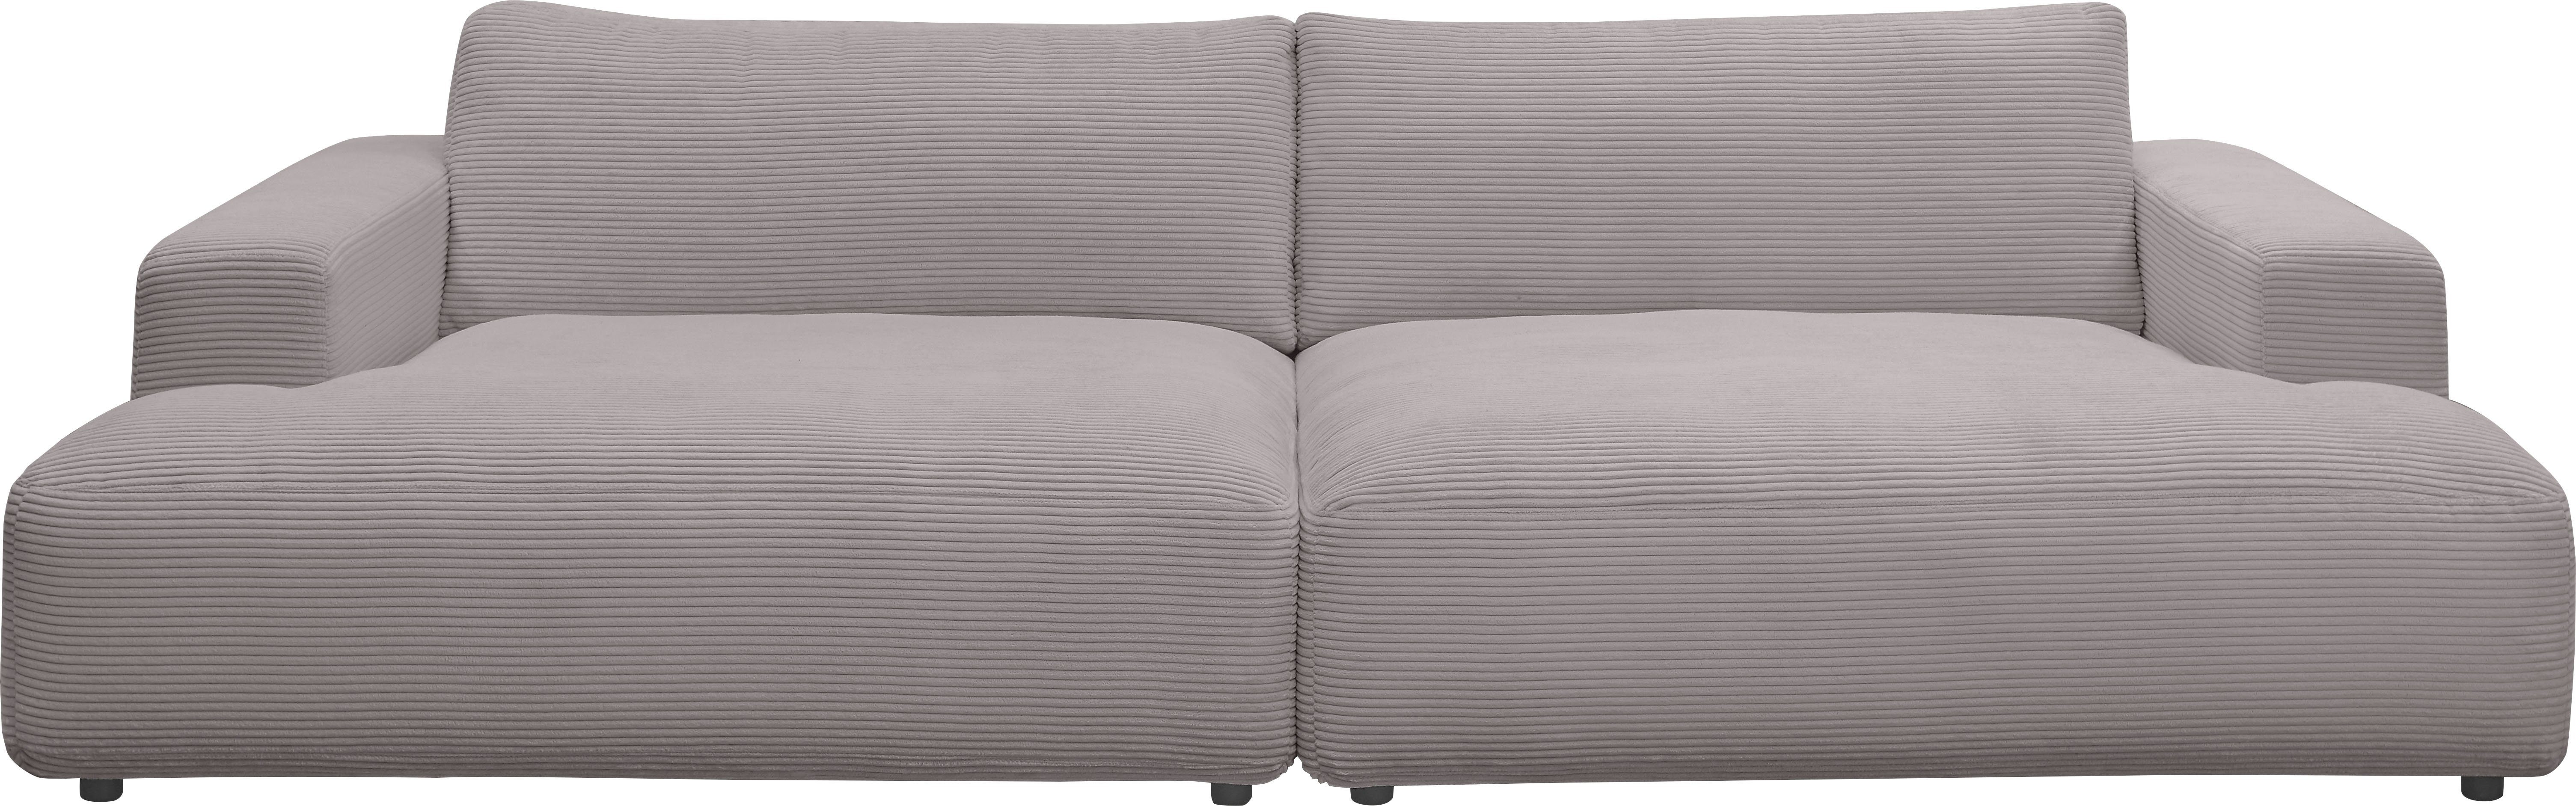 grey by branded Loungesofa cm Lucia, 292 GALLERY Cord-Bezug, Breite Musterring M